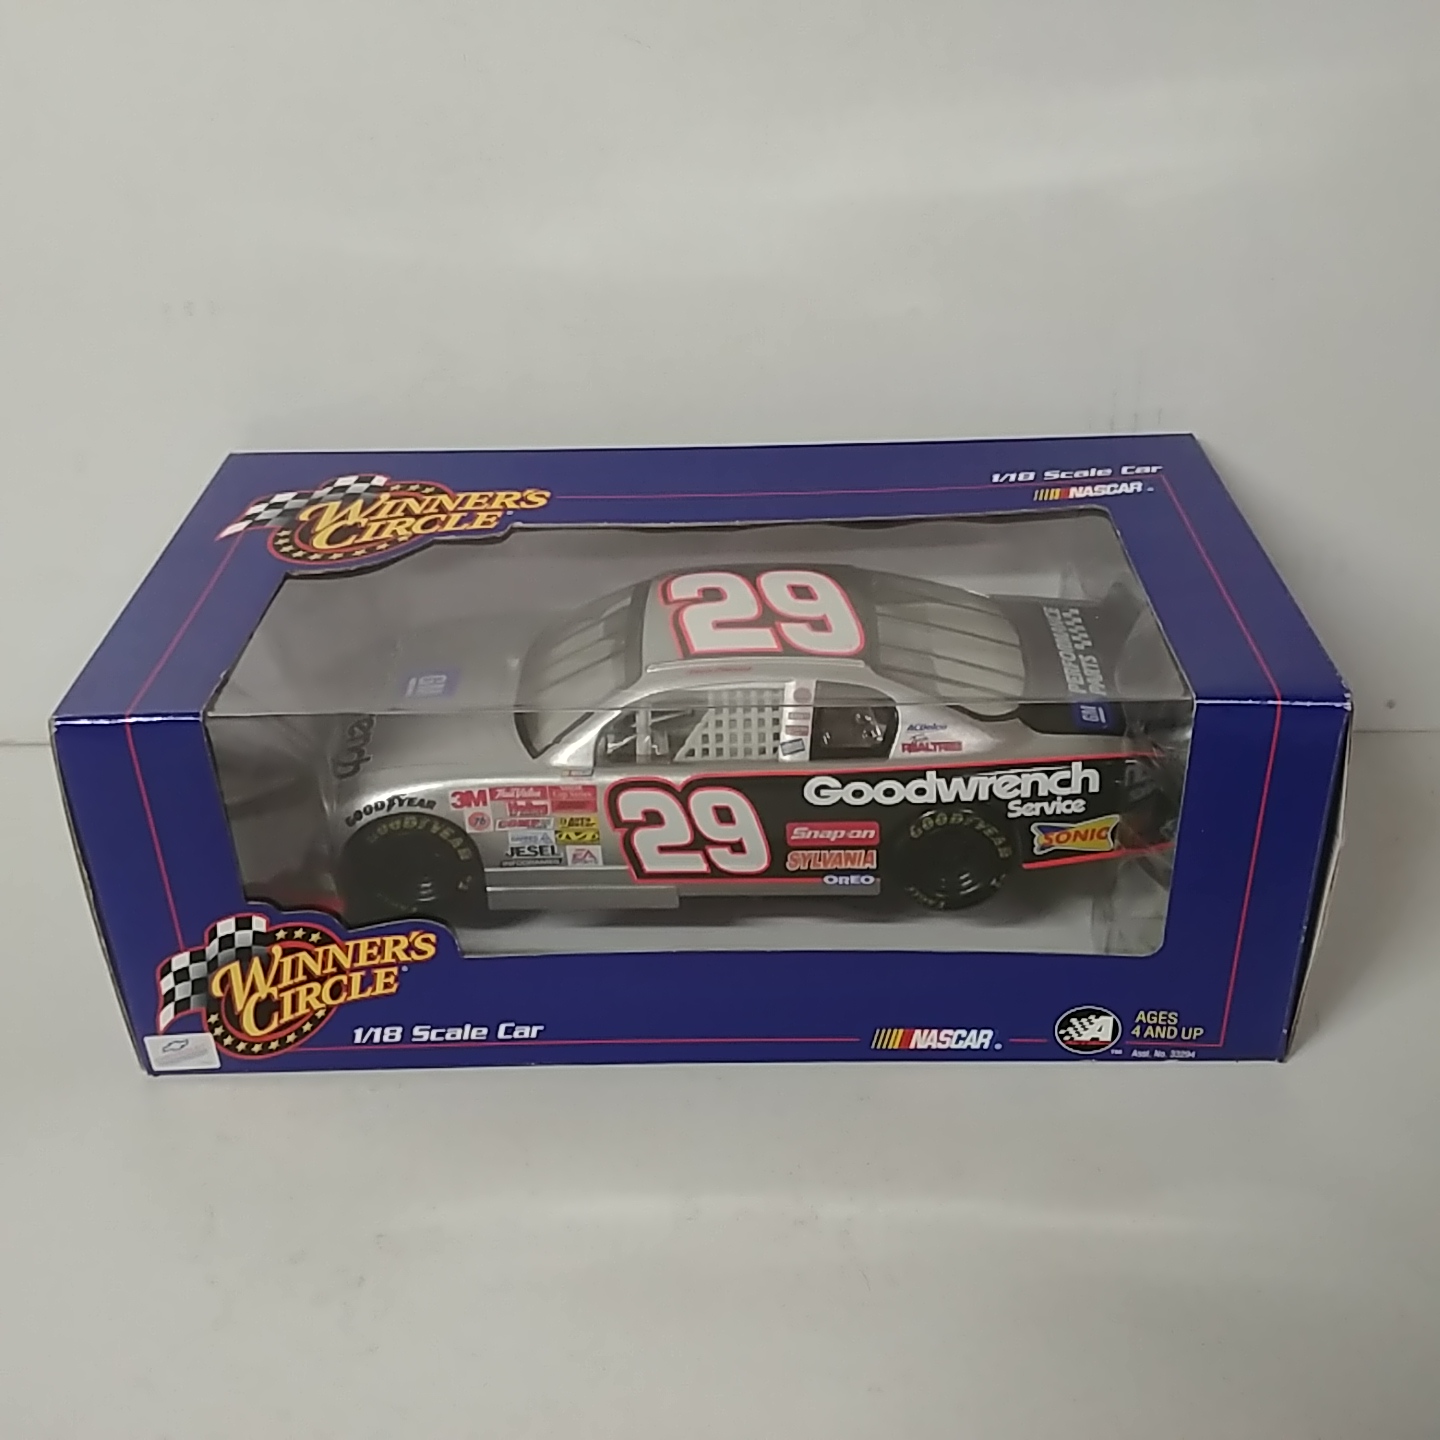 2002 Kevin Harvick 1/18th GM Goodwrench car